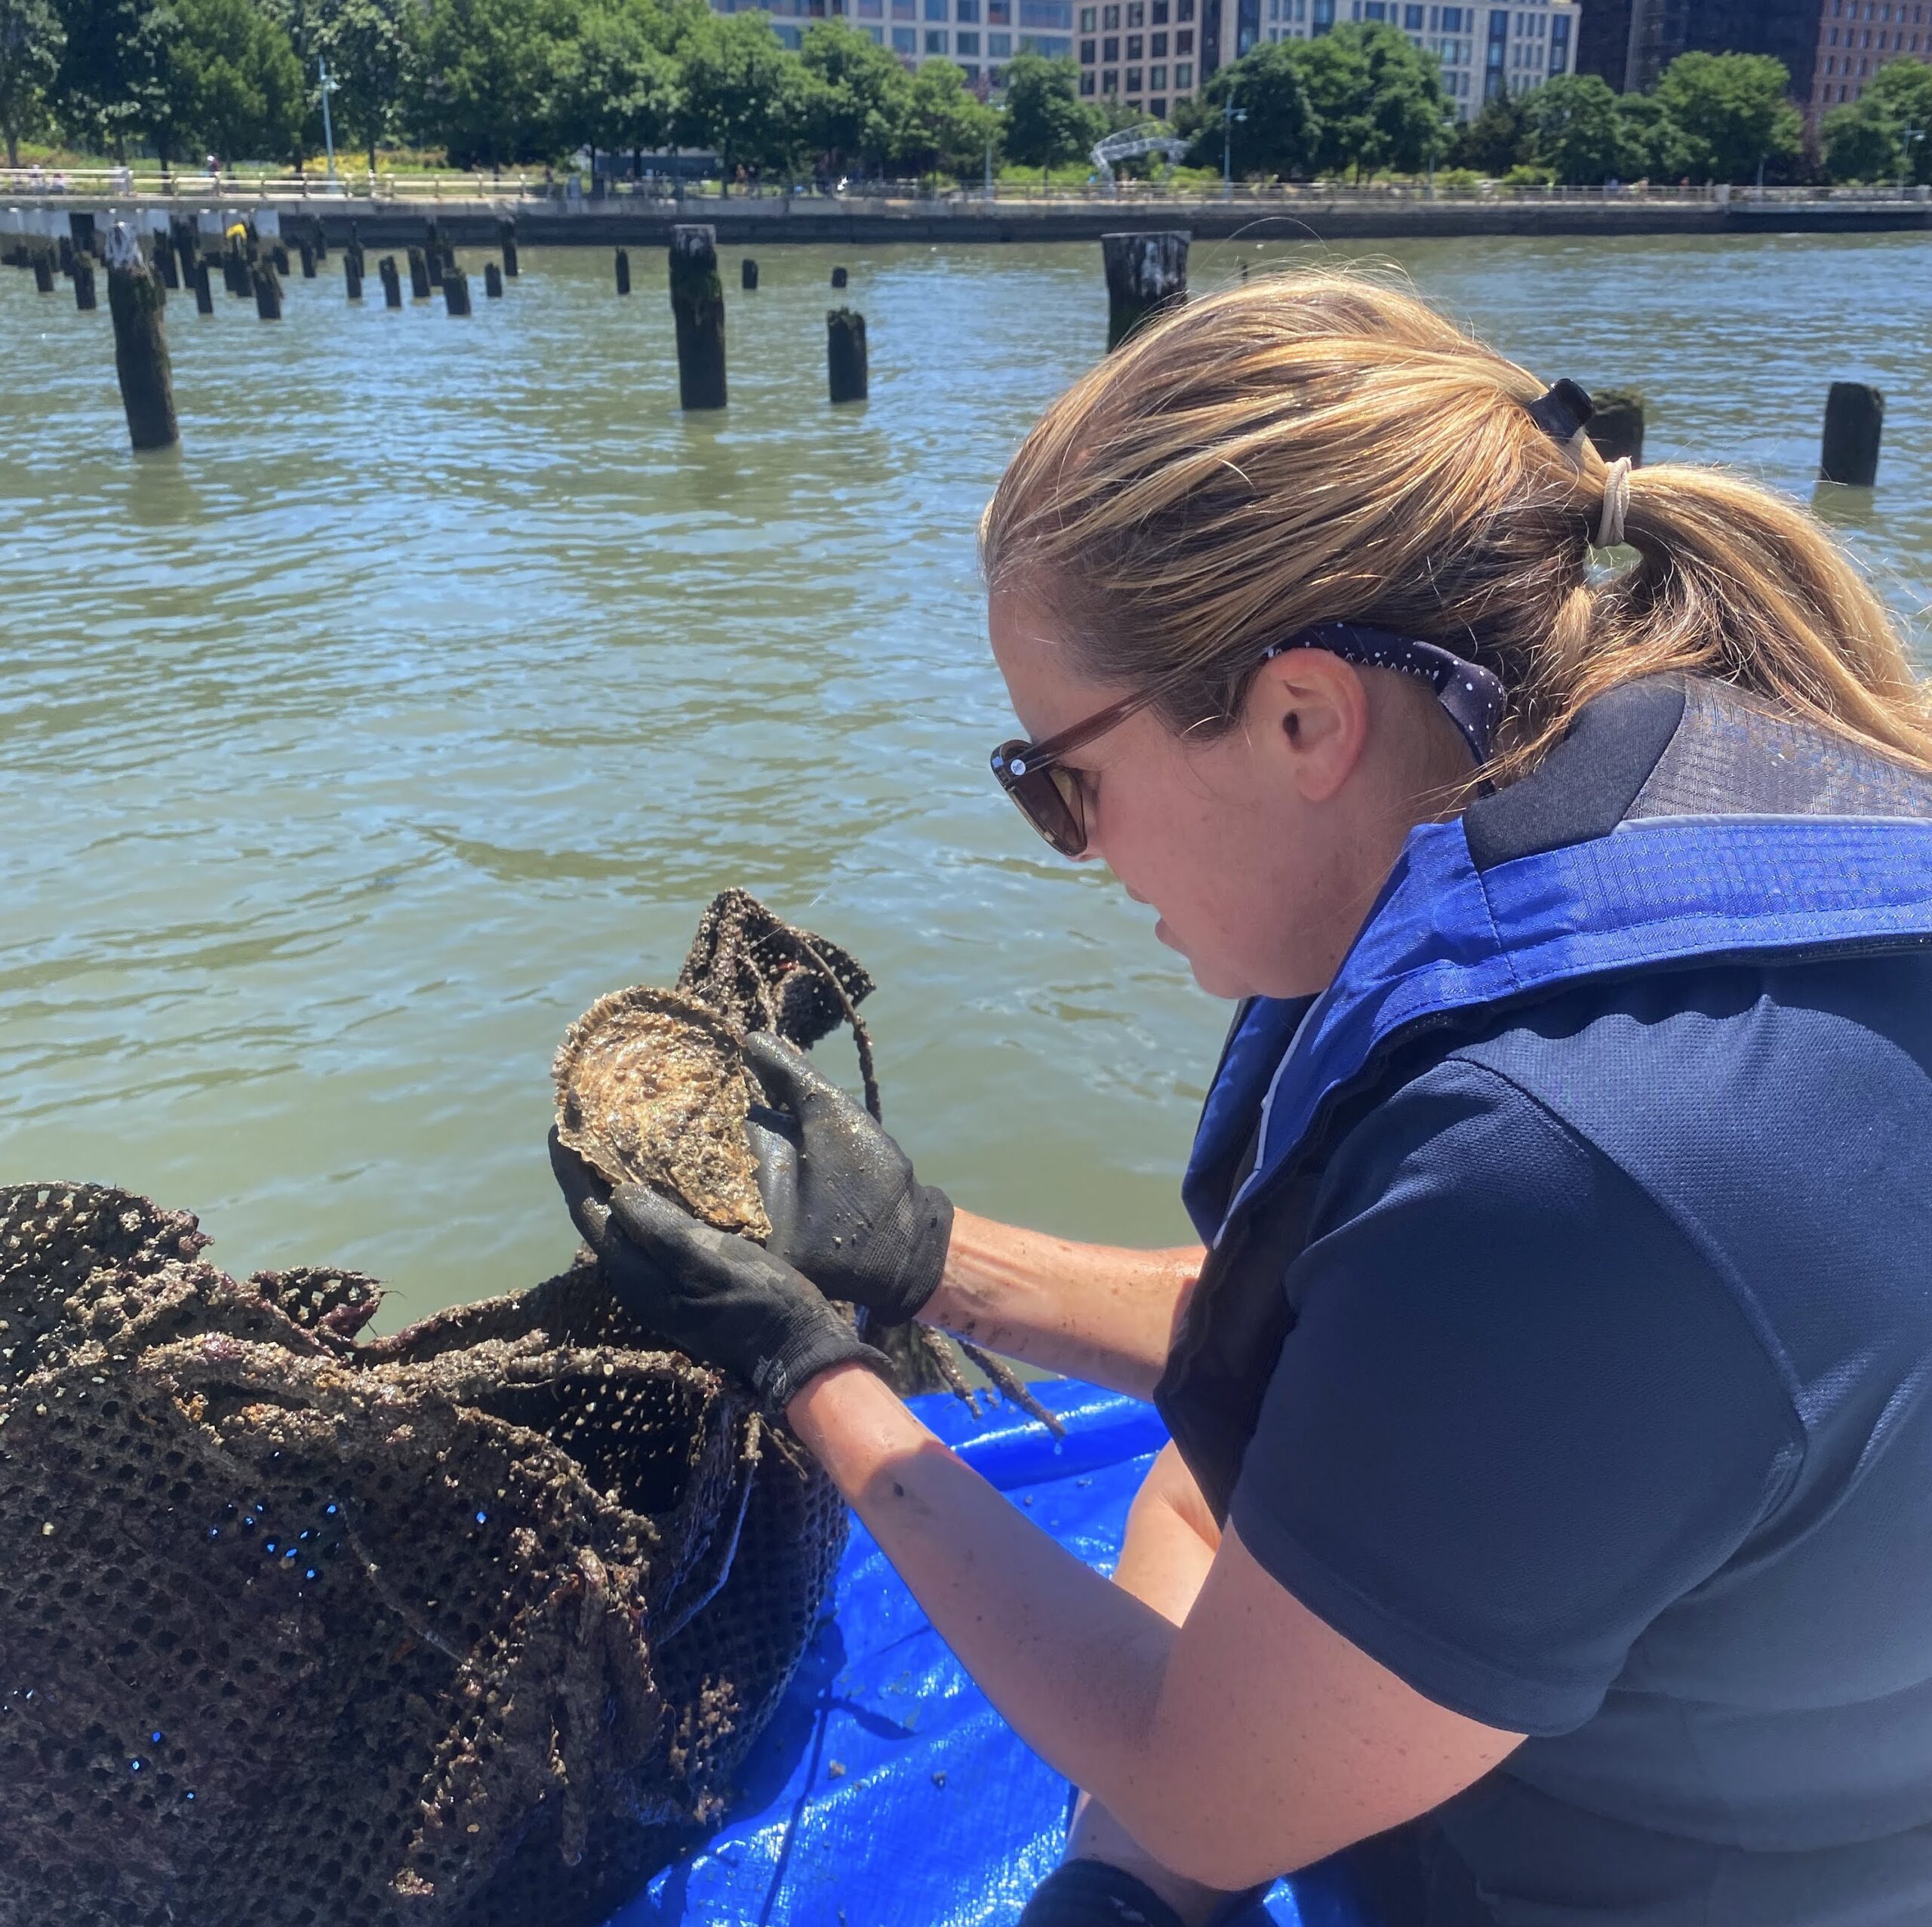 A Hudson River Park River Project staffer examining an oyster